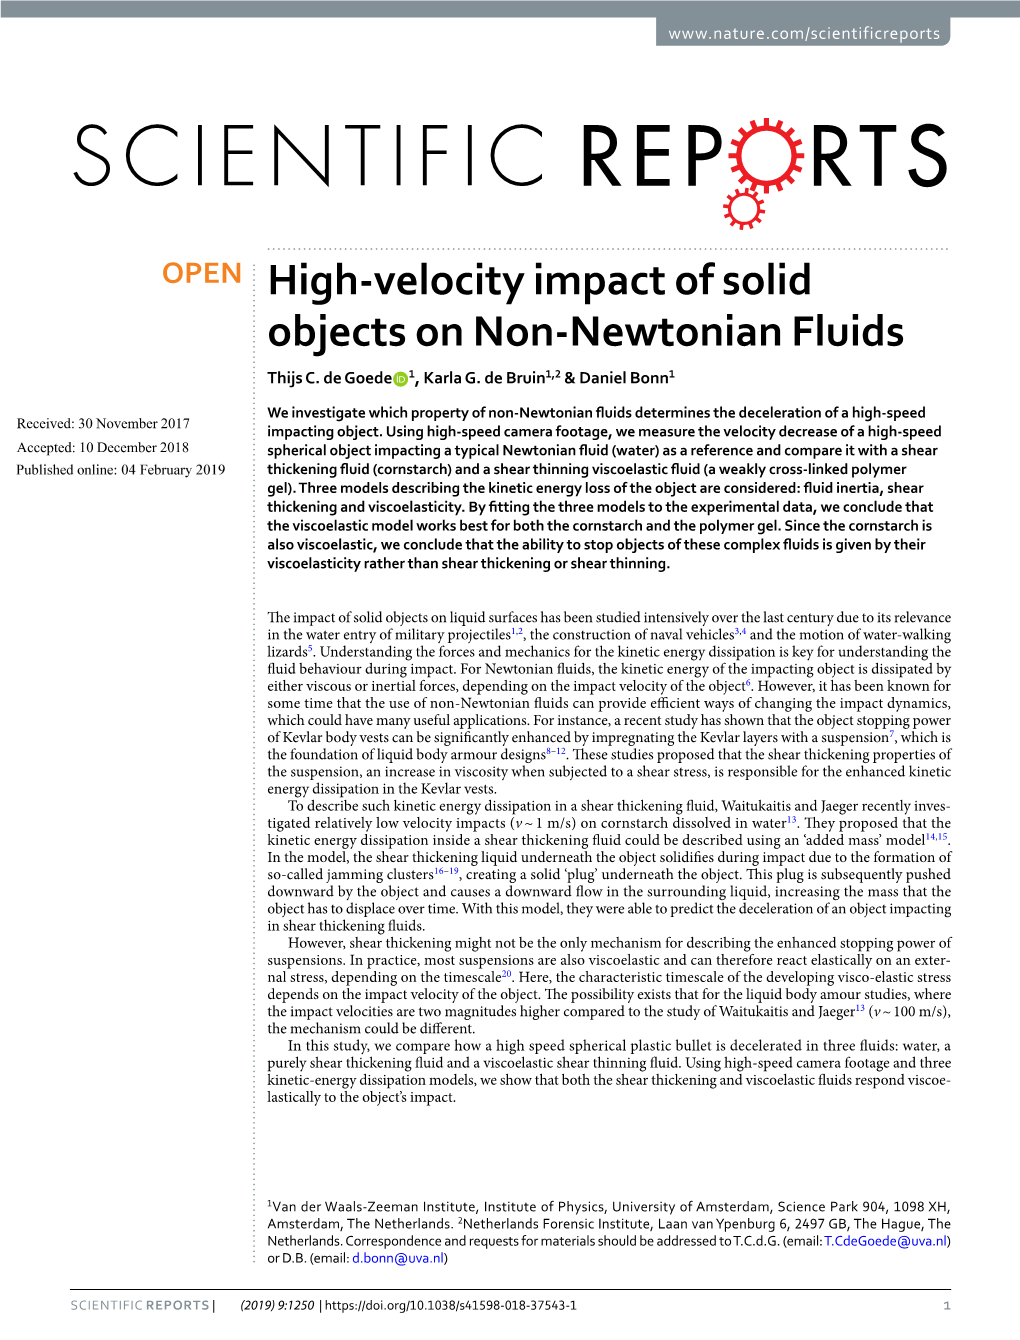 High-Velocity Impact of Solid Objects on Non-Newtonian Fluids Thijs C